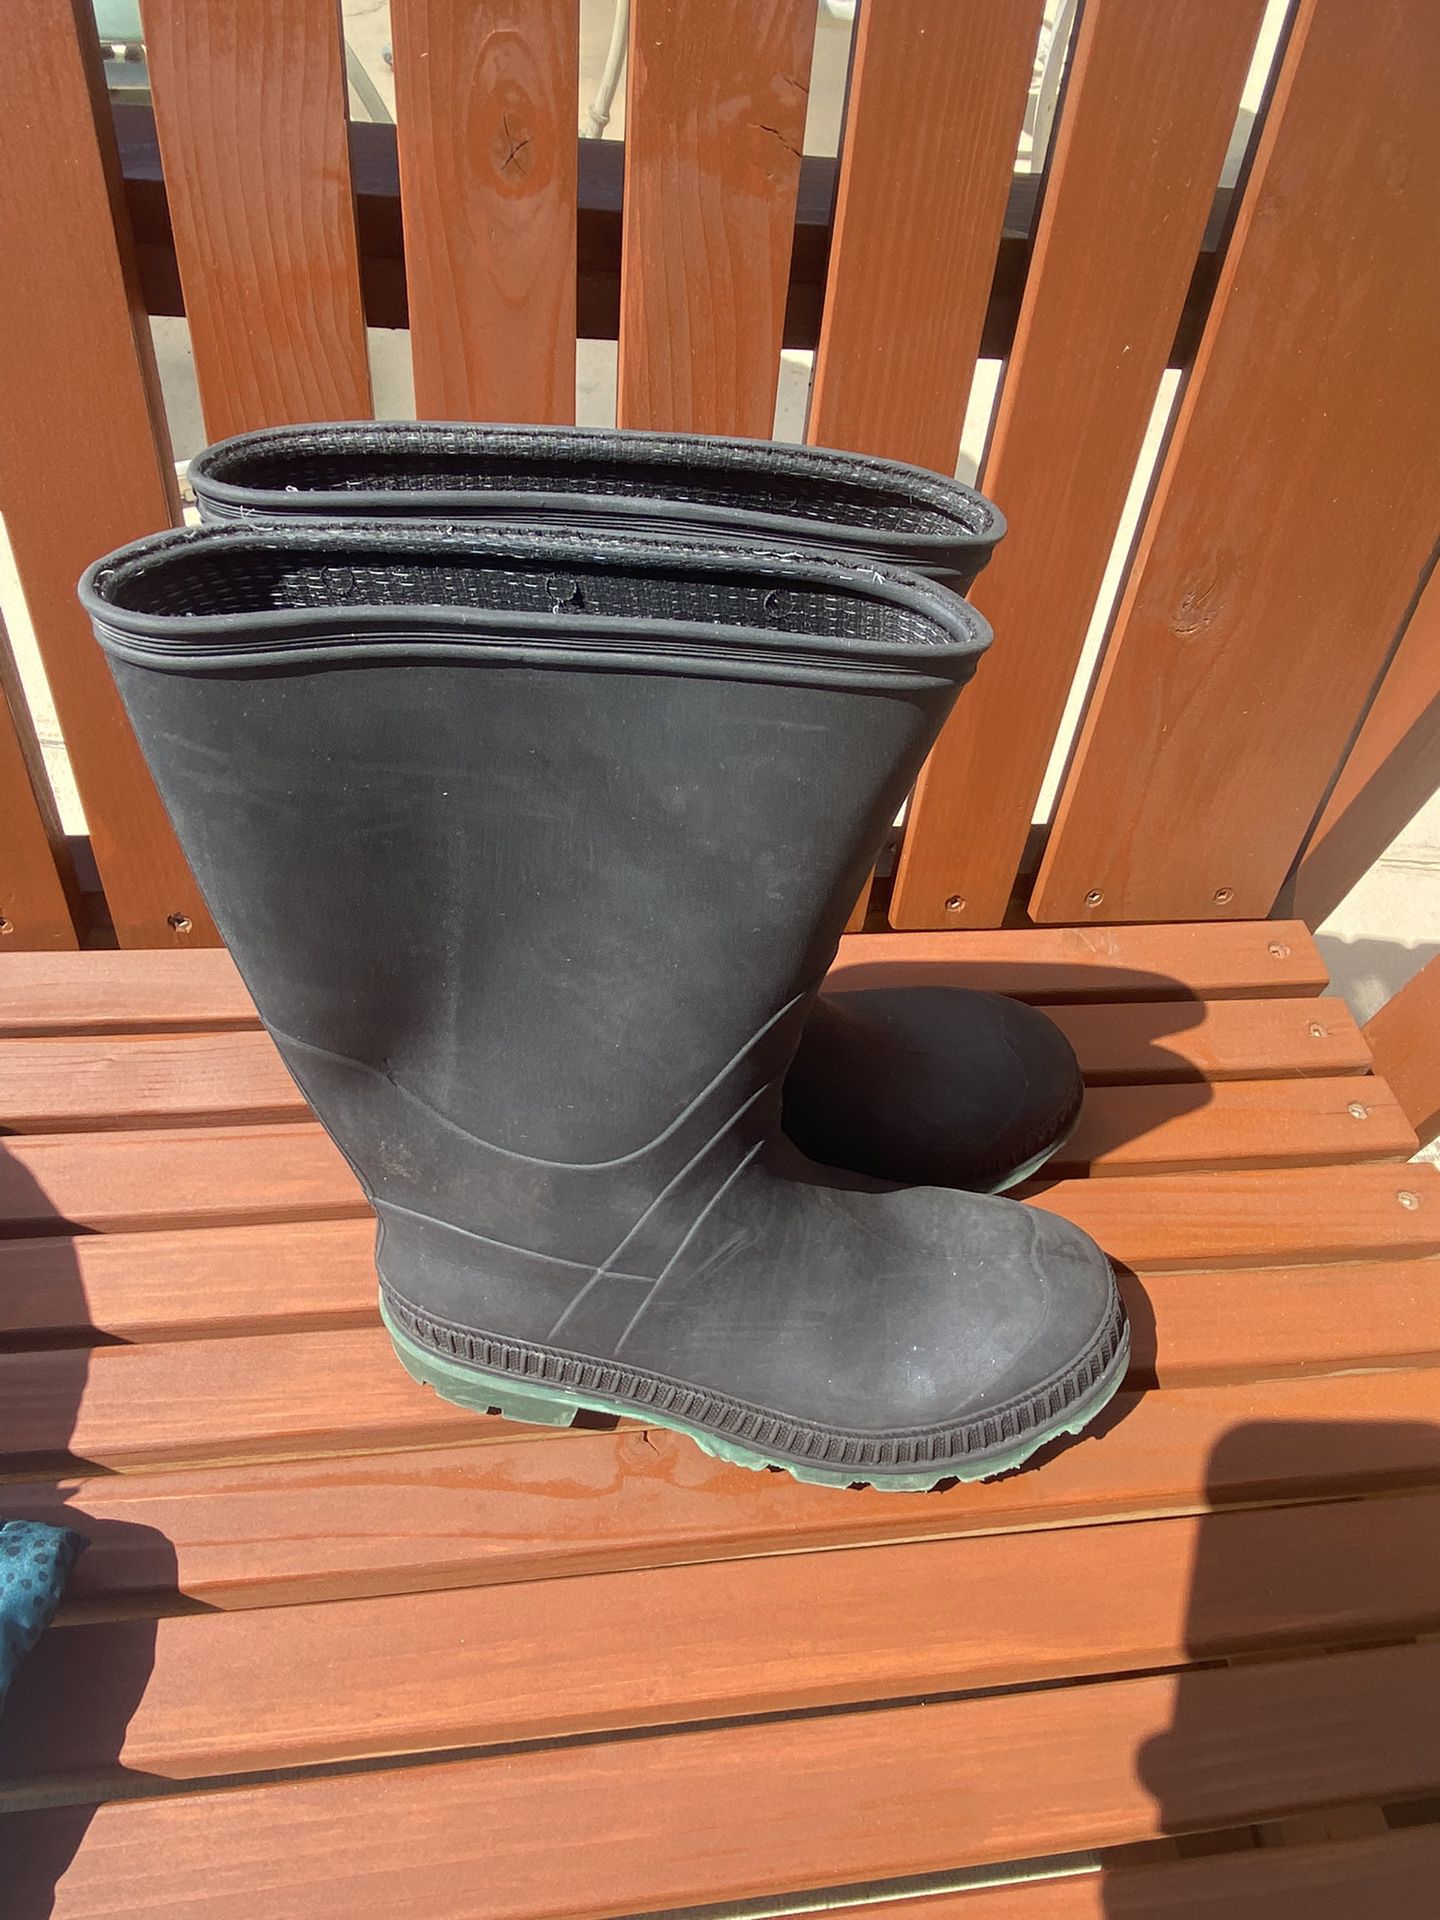 Rain Boots Size 5 Youth